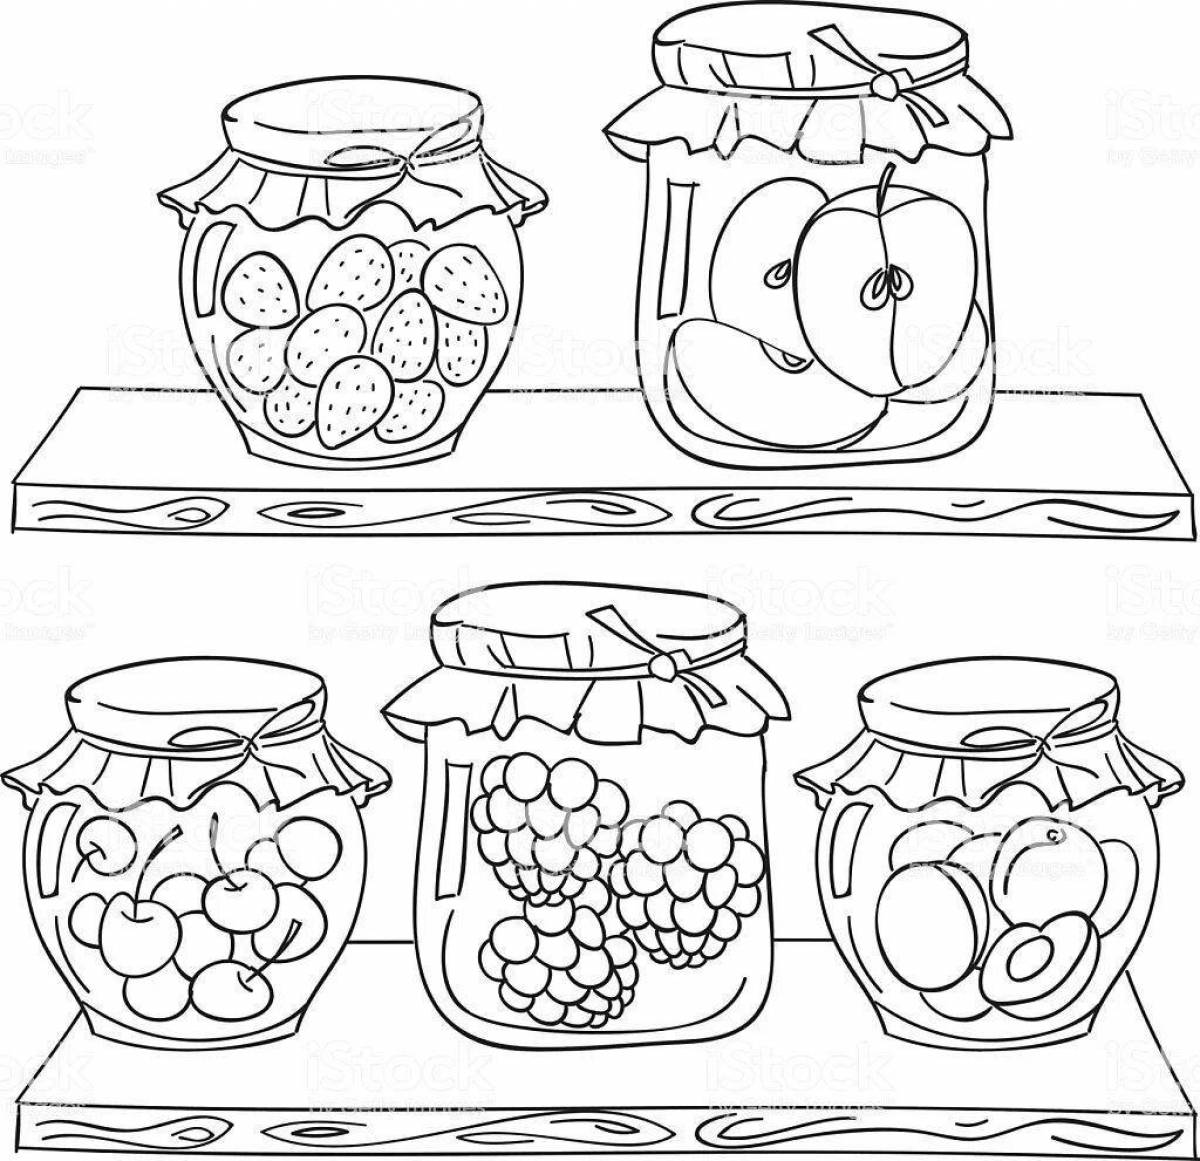 Inviting compote 404 coloring